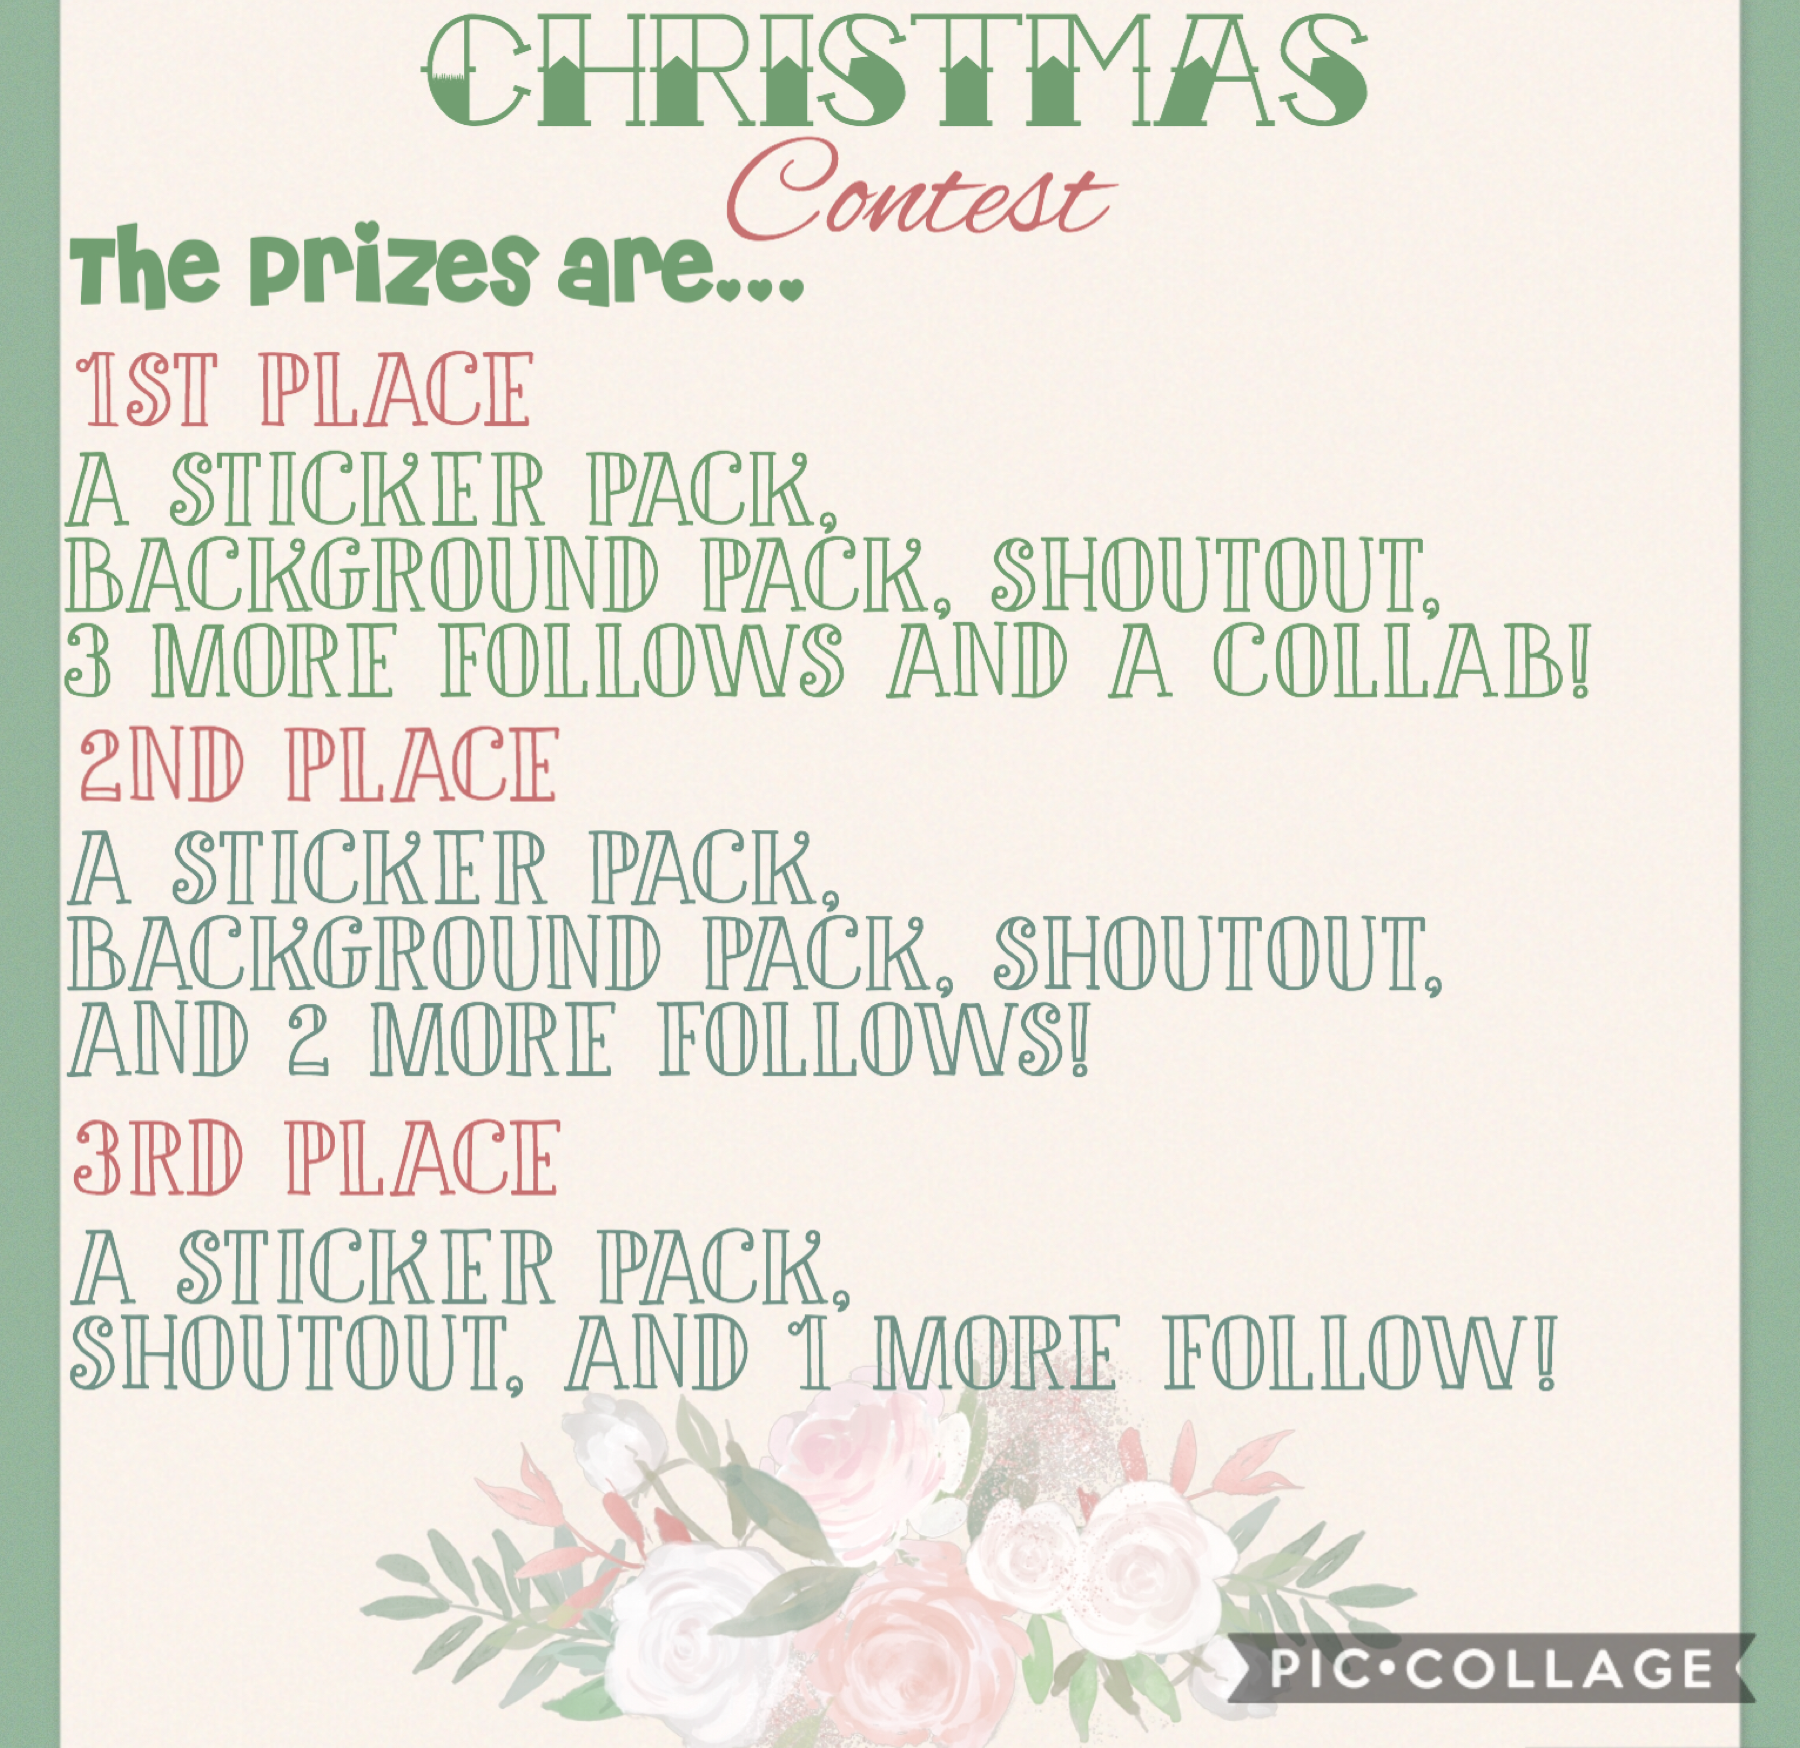 🎅🏻TAP🎅🏻

HEY FOLLOWERS! 
Here are more infos about the contest! 
Please please please join and spread the word! 
Have fun! 